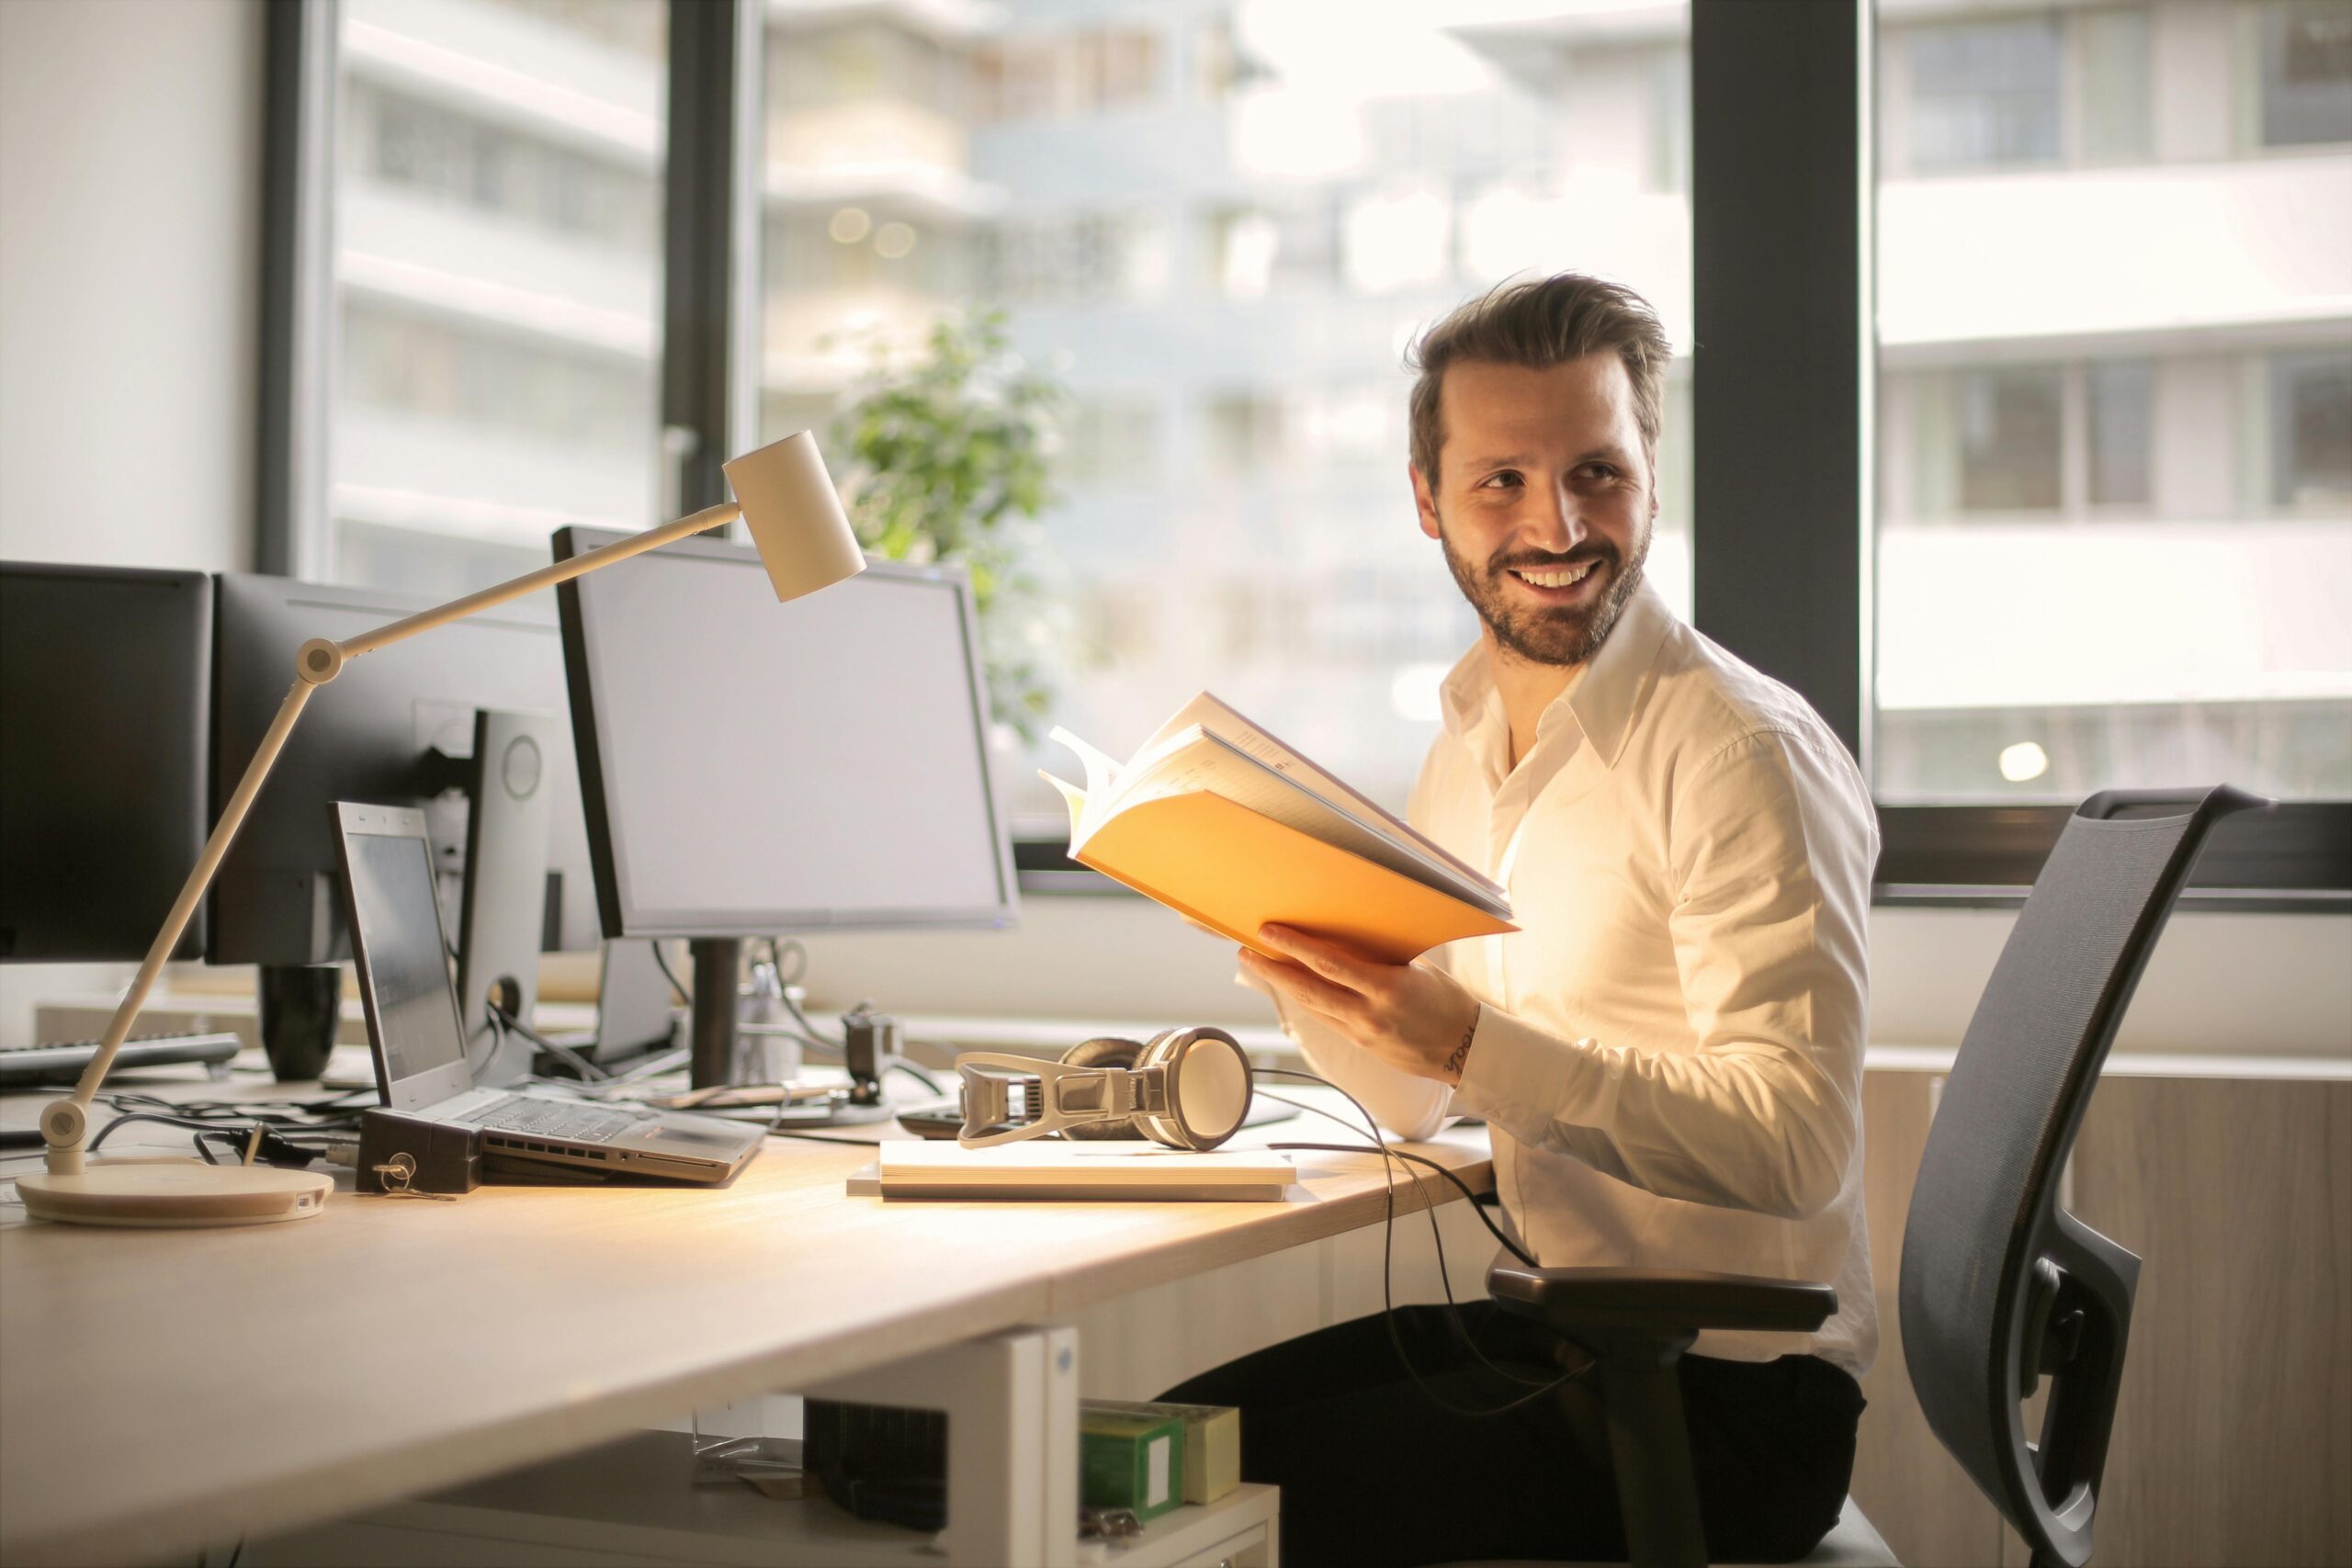 Smiling man working at office desk with computer